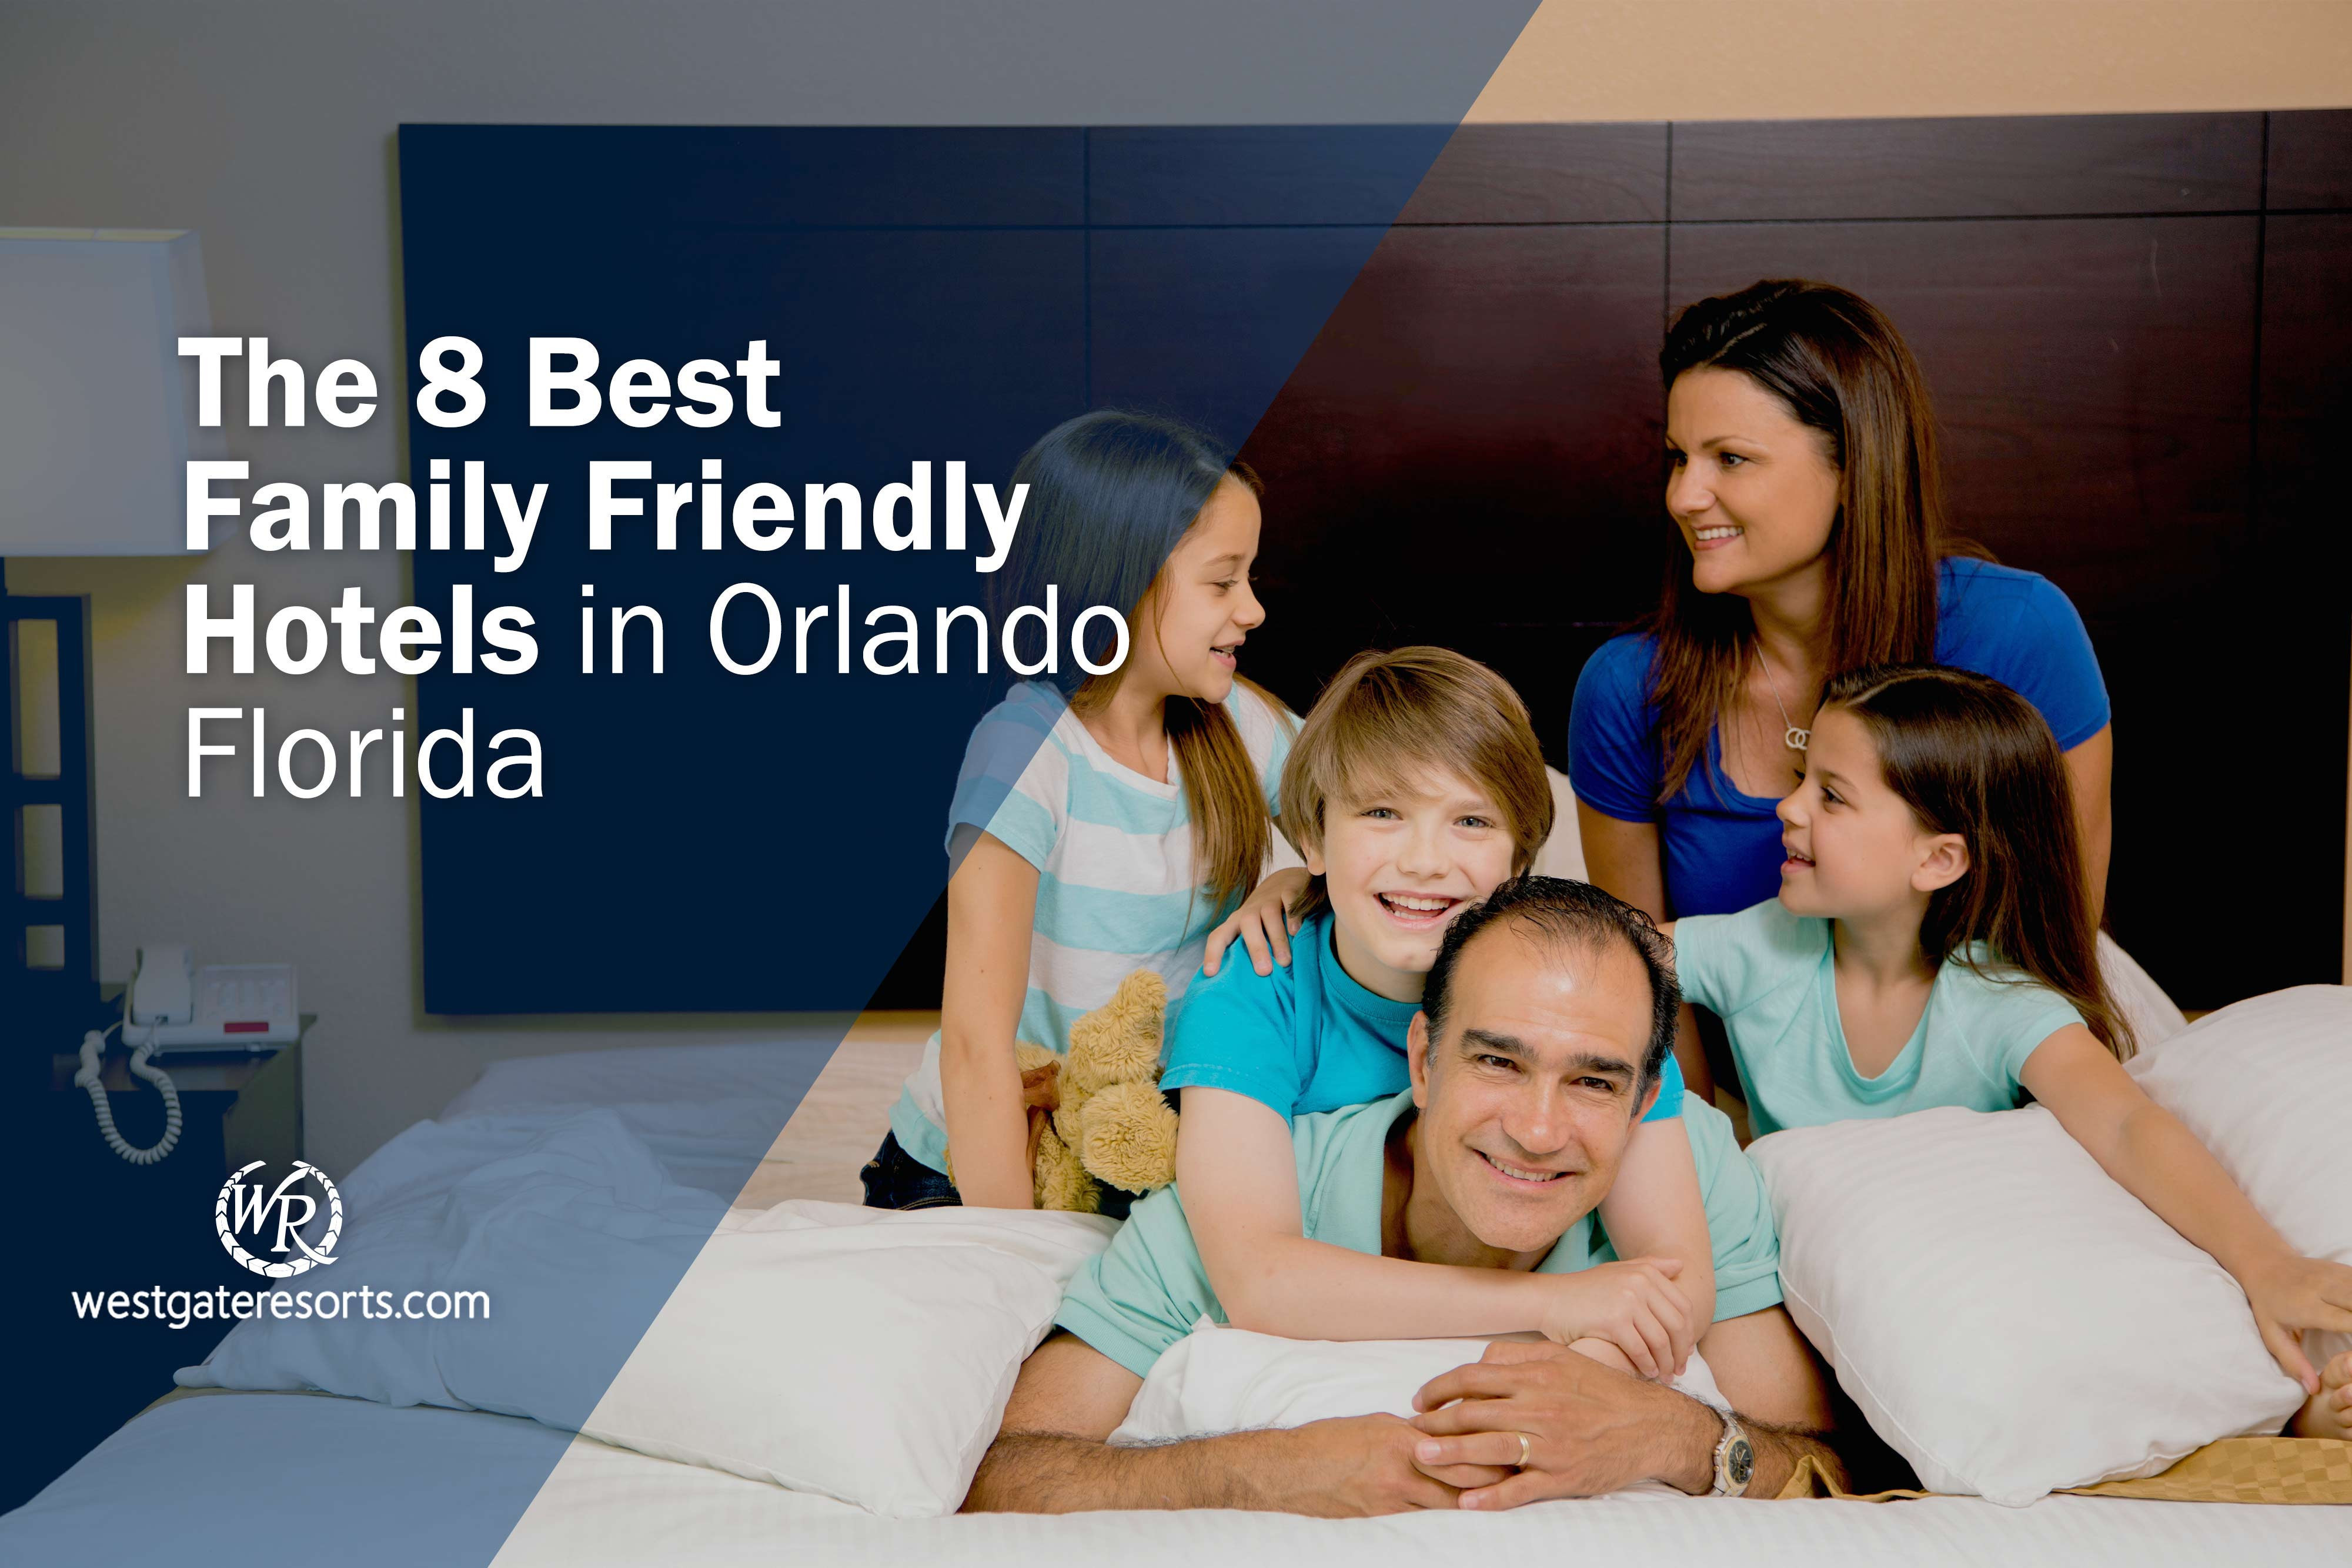 The 8 Best Family Friendly Hotels in Orlando Florida | Orlando Family Hotels & Resorts